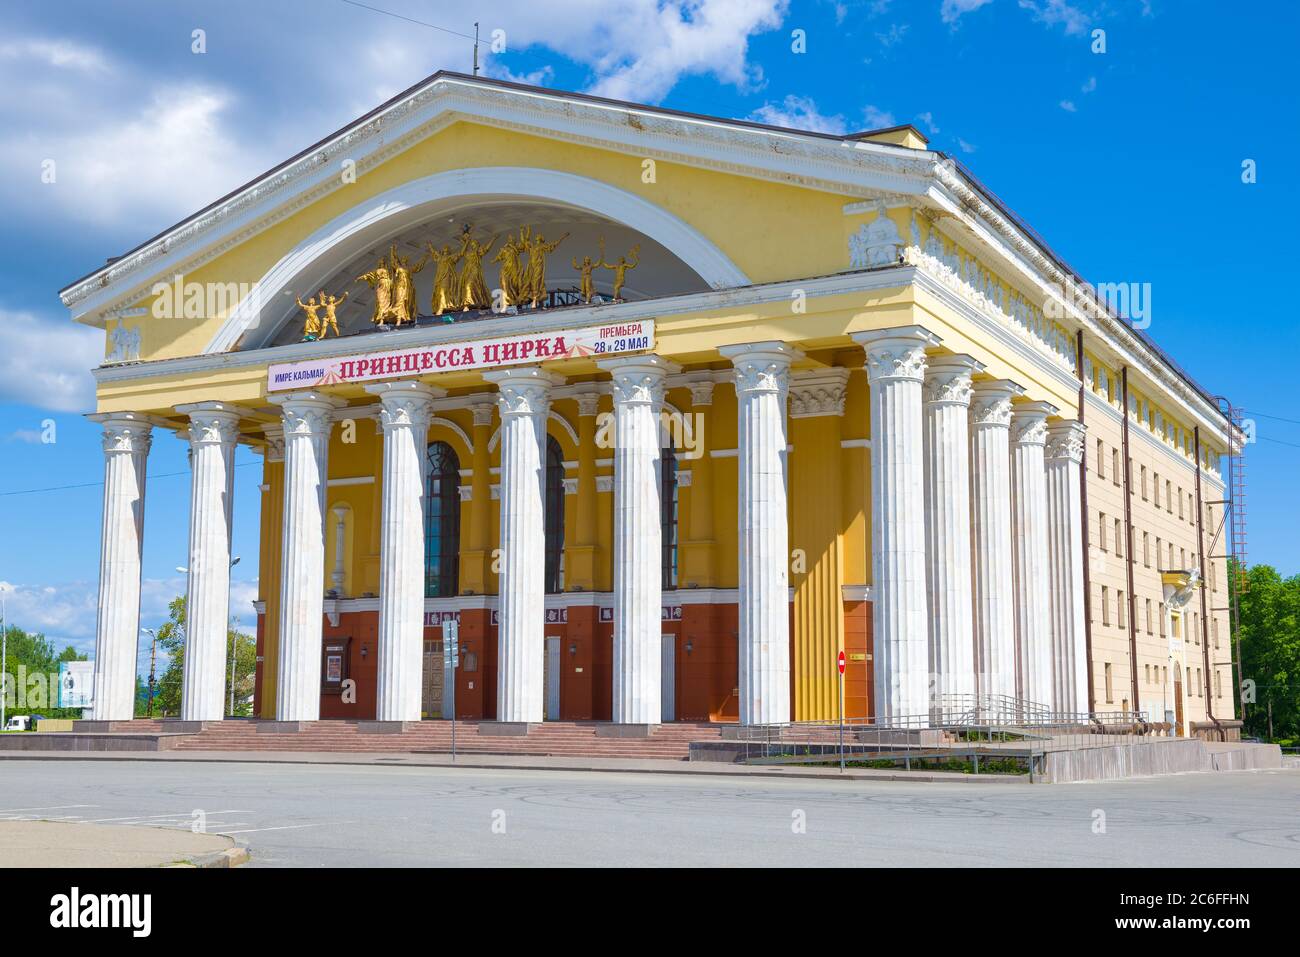 PETROZAVODSK, RUSSIA - JUNE 12, 2020: The building of the Musical Theater of the Republic of Karelia close up on a sunny June day Stock Photo